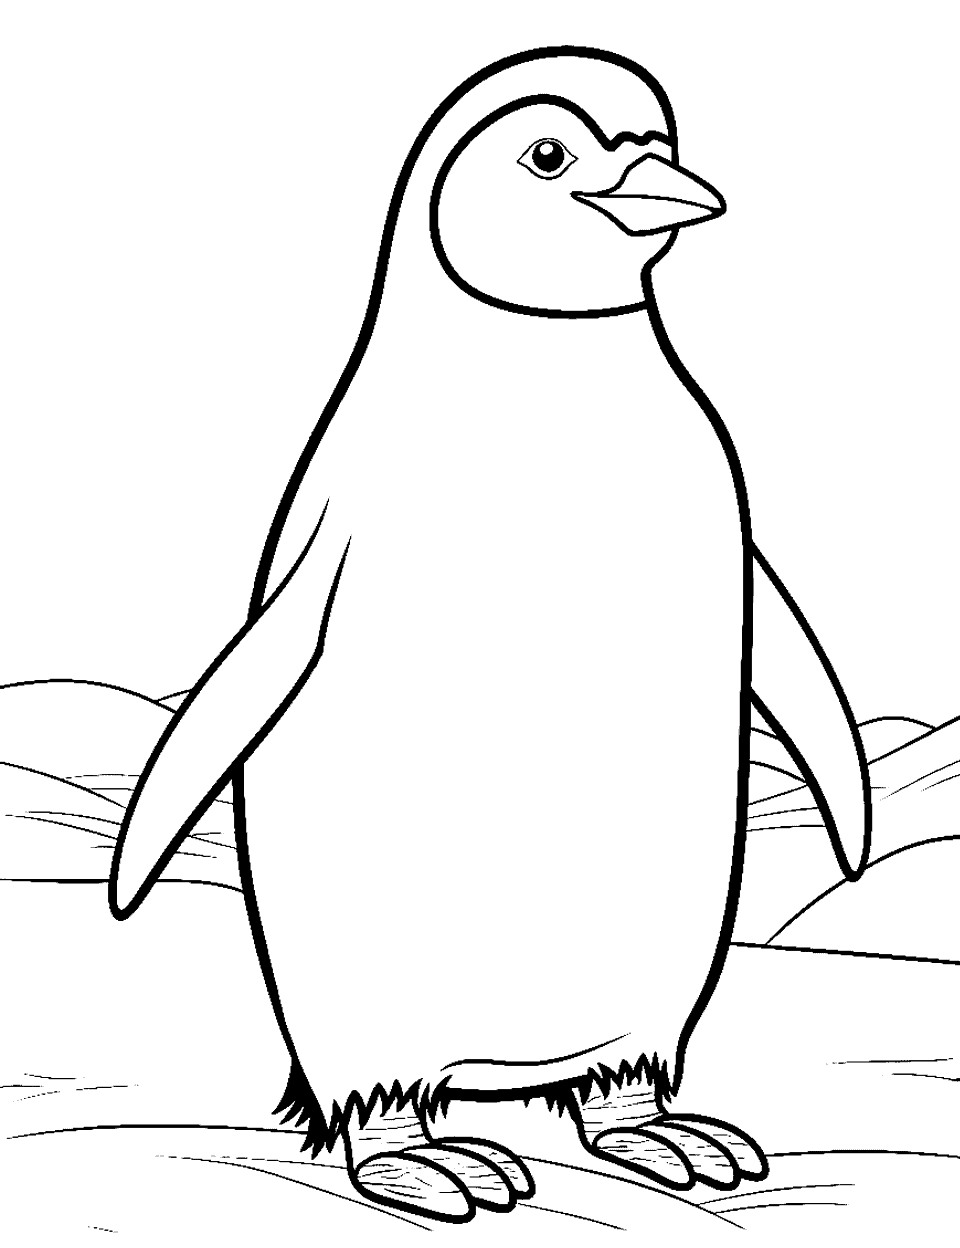 Realistic Emperor Penguin Coloring Page - A tall emperor penguin standing proudly on an ice patch.